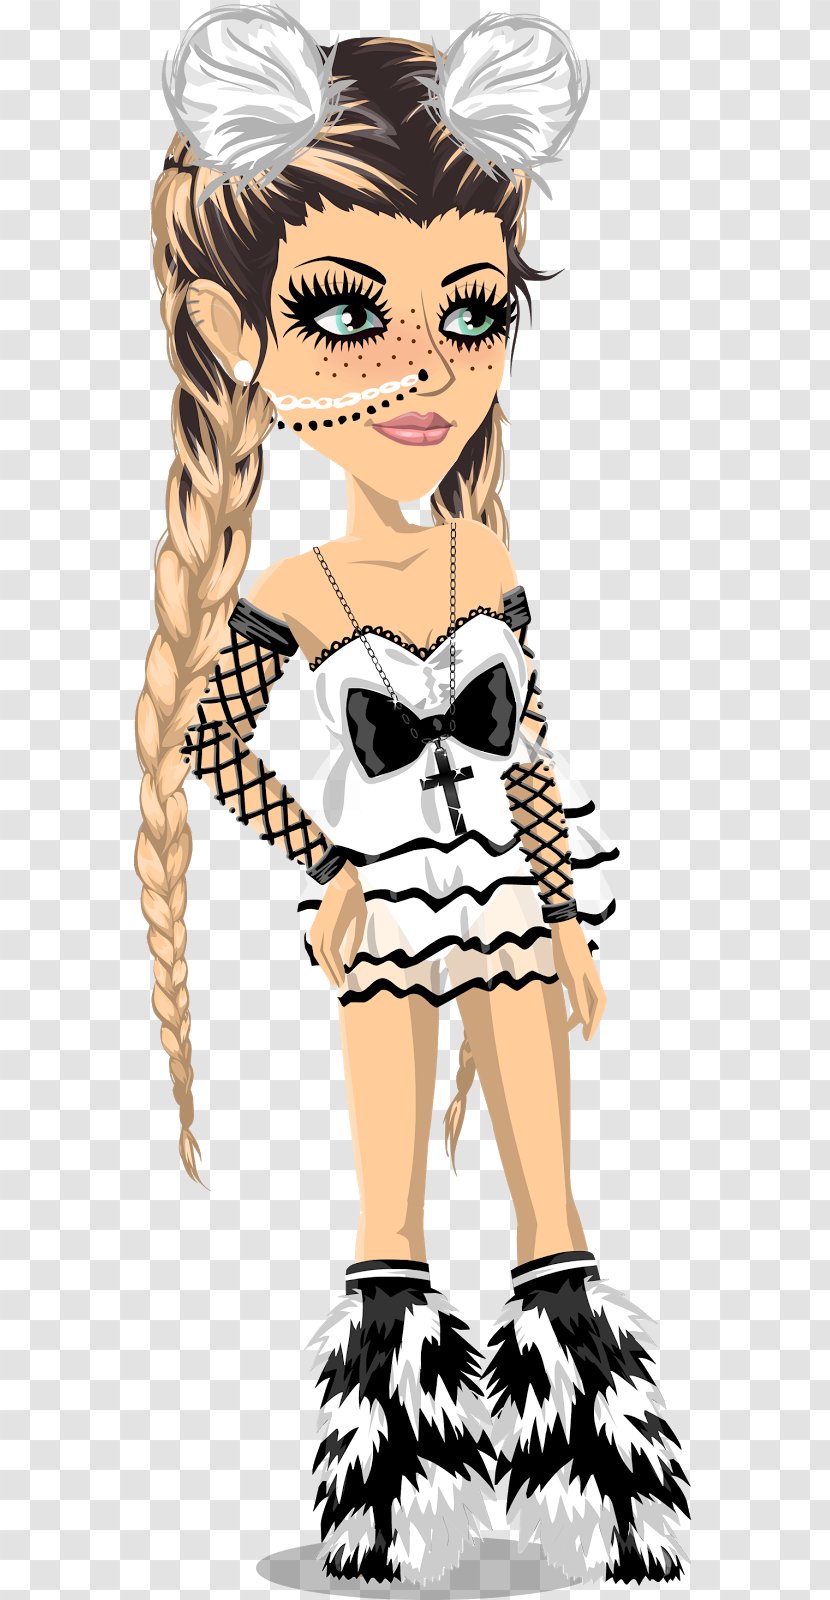 Blog Moviestarplanet Keyword Research - Heart - SUMMER OUTFIT Transparent PNG